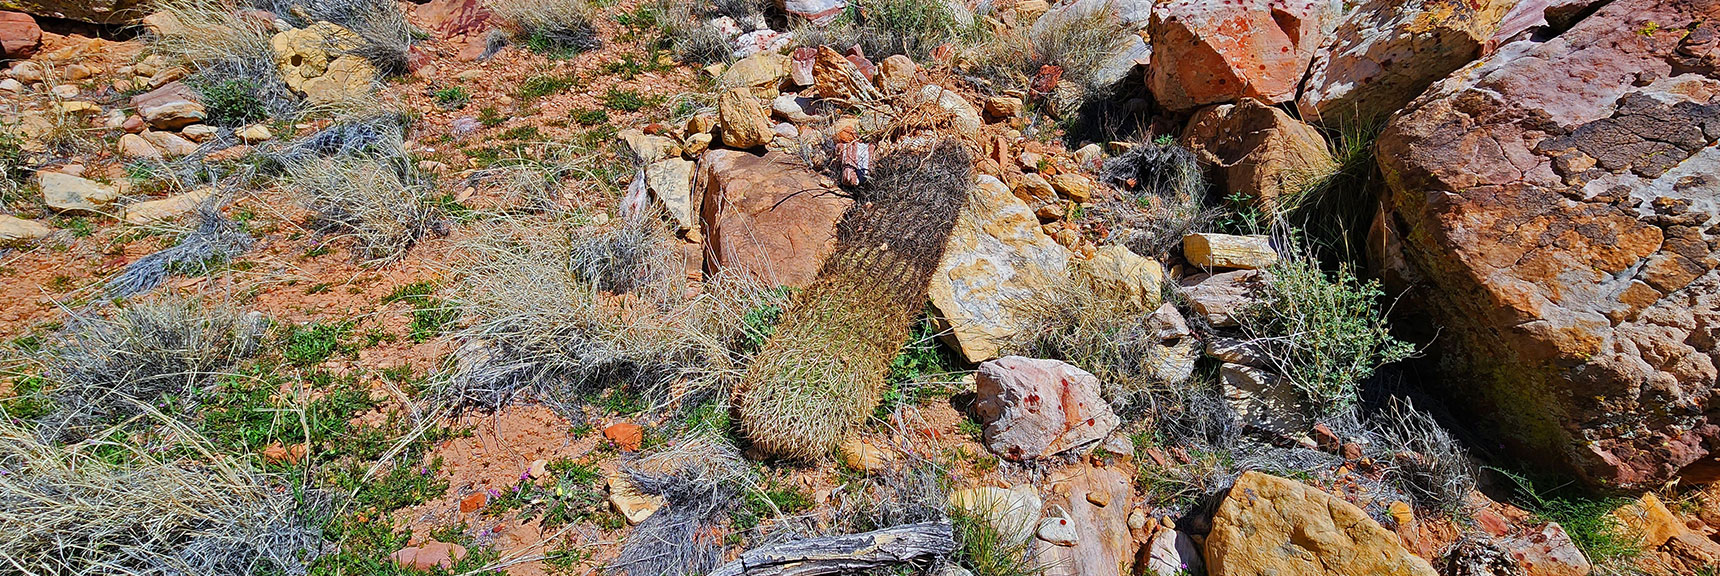 This Cactus Didn't Make It. Harsh Environment. | Dales Trail | Red Rock Canyon National Conservation Area, Nevada | David Smith | LasVegasAreaTrails.com